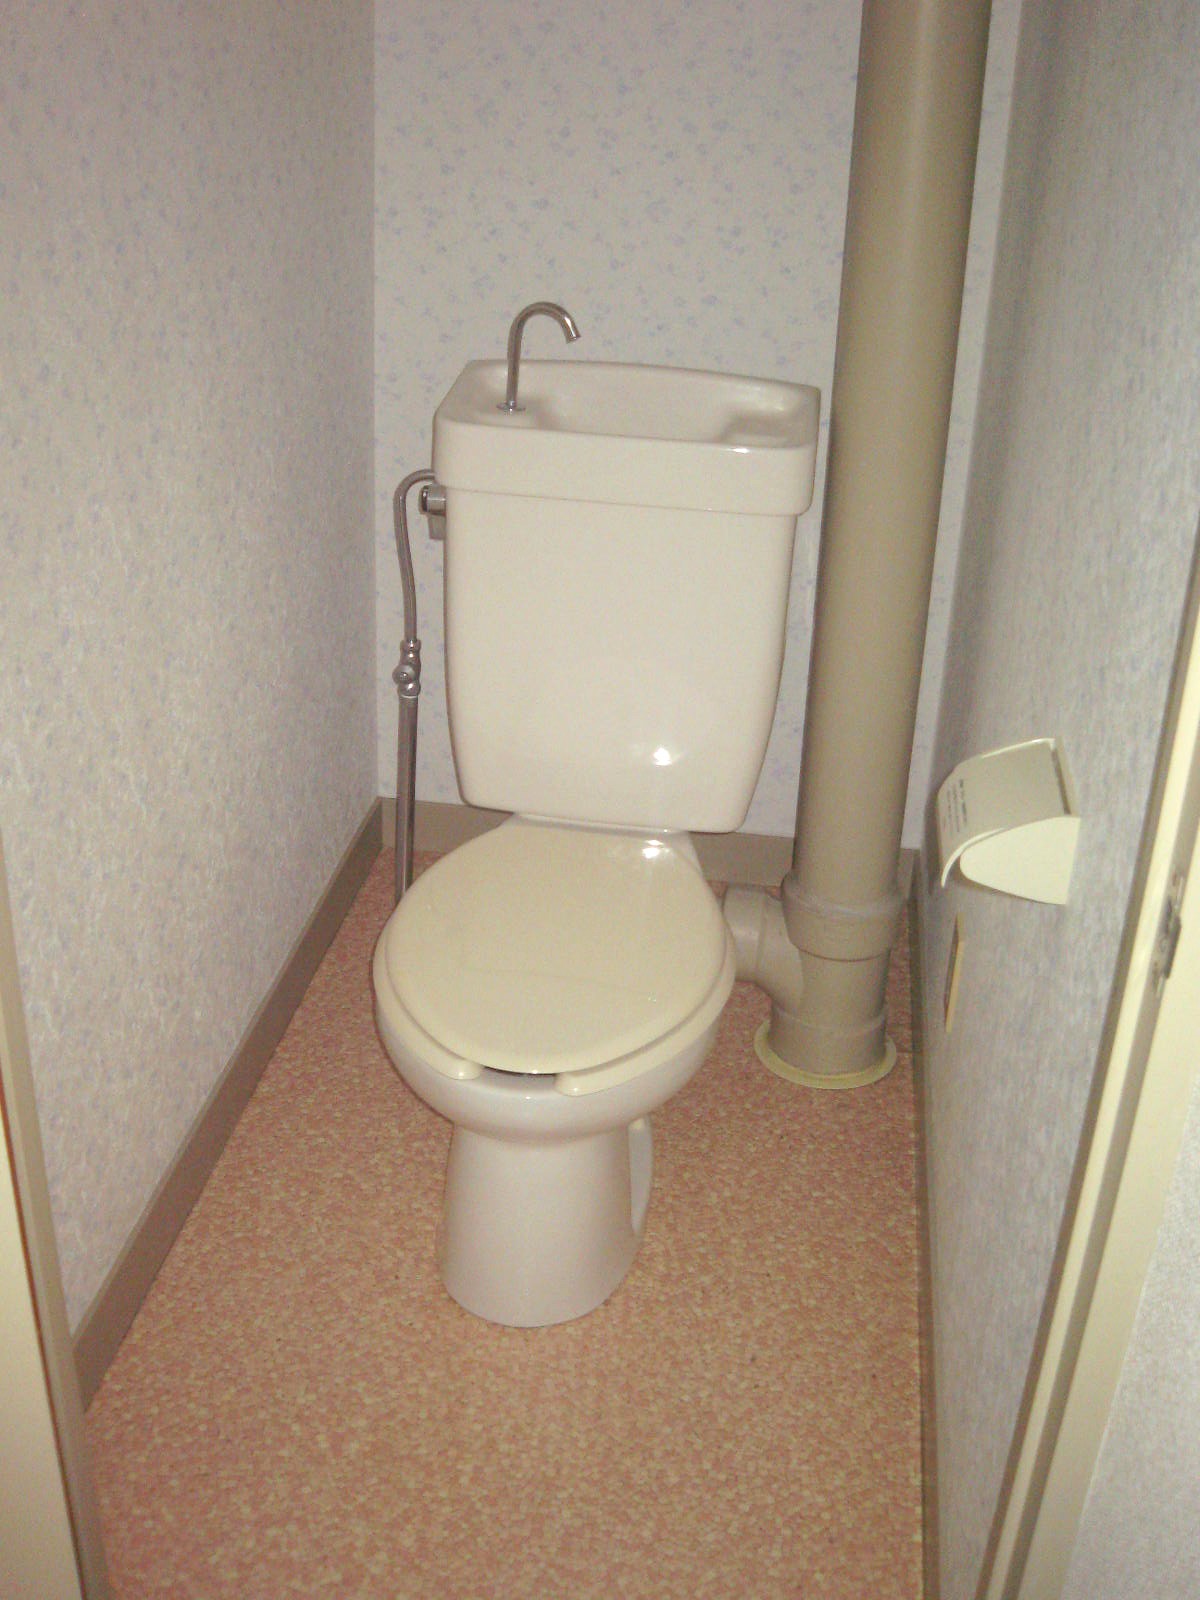 Toilet. It will be warm water washing toilet seat.